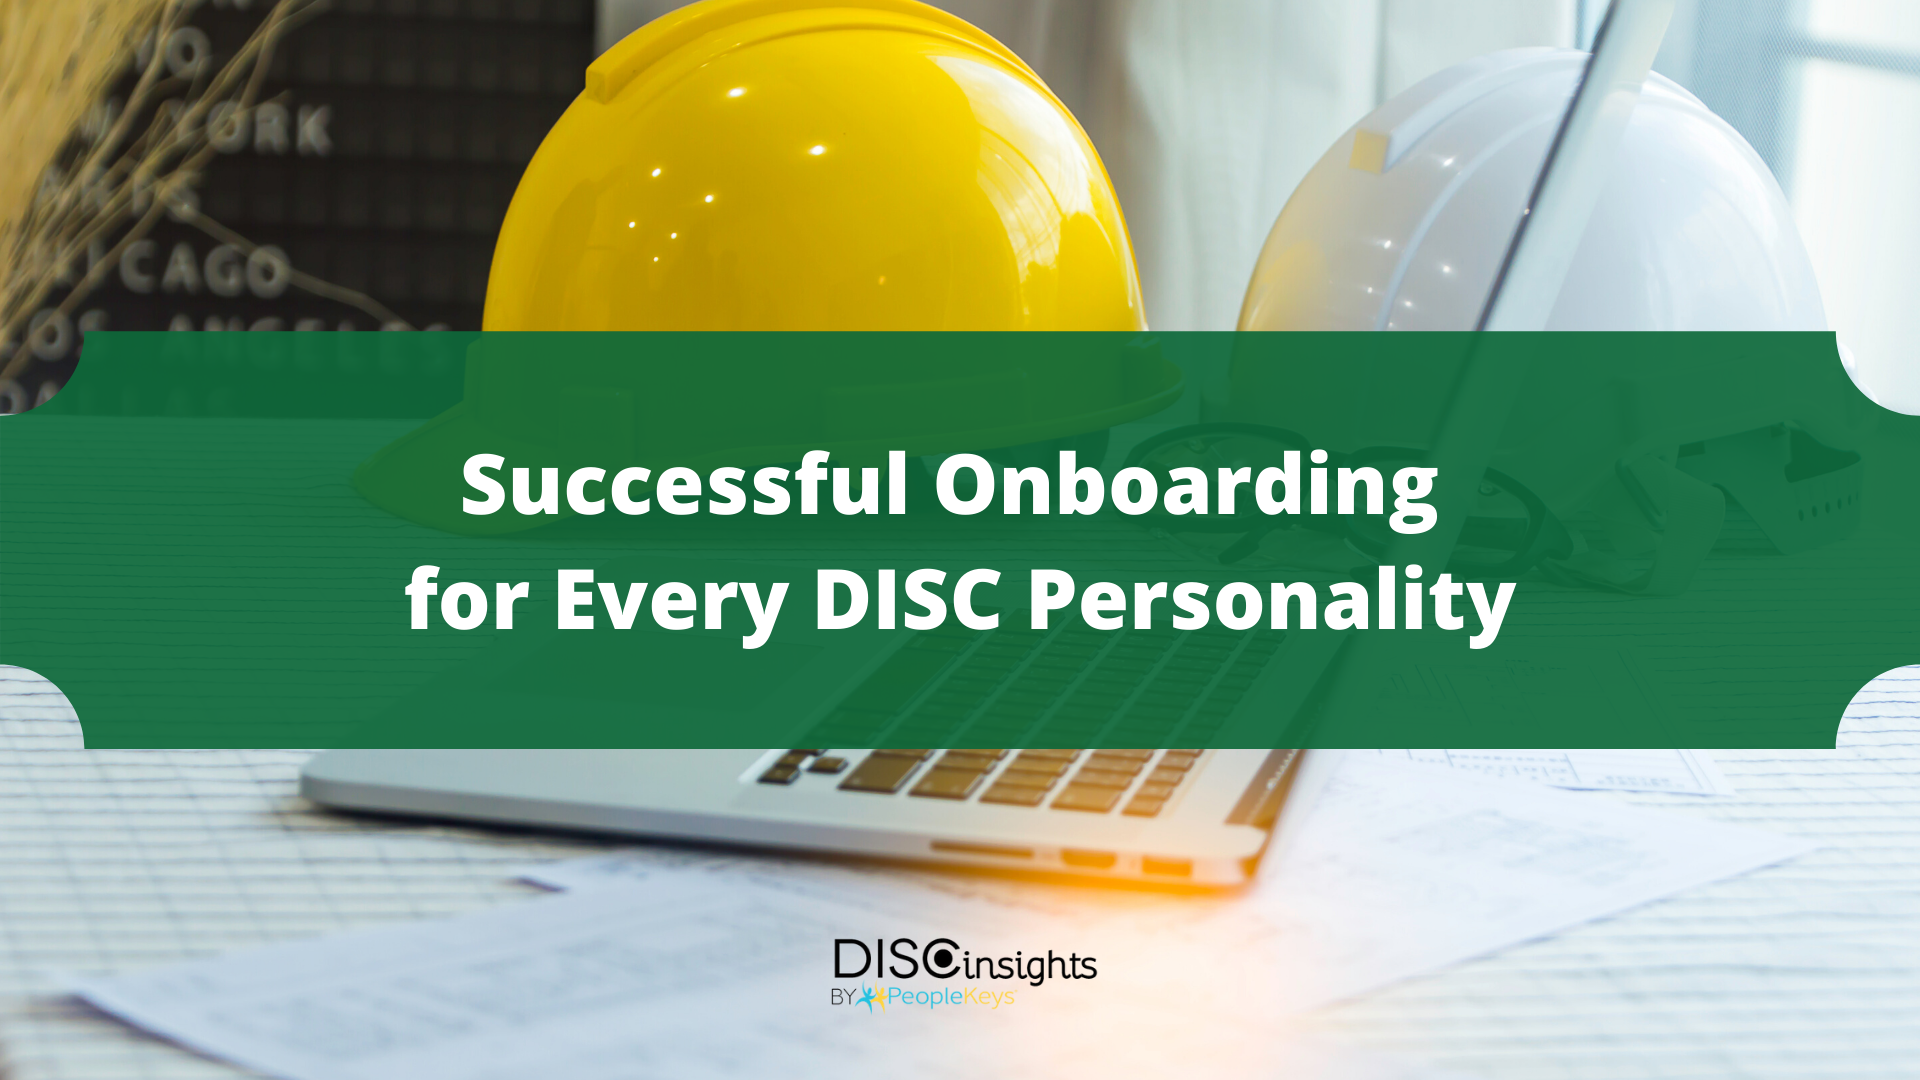 Onboarding Based on DISC Style